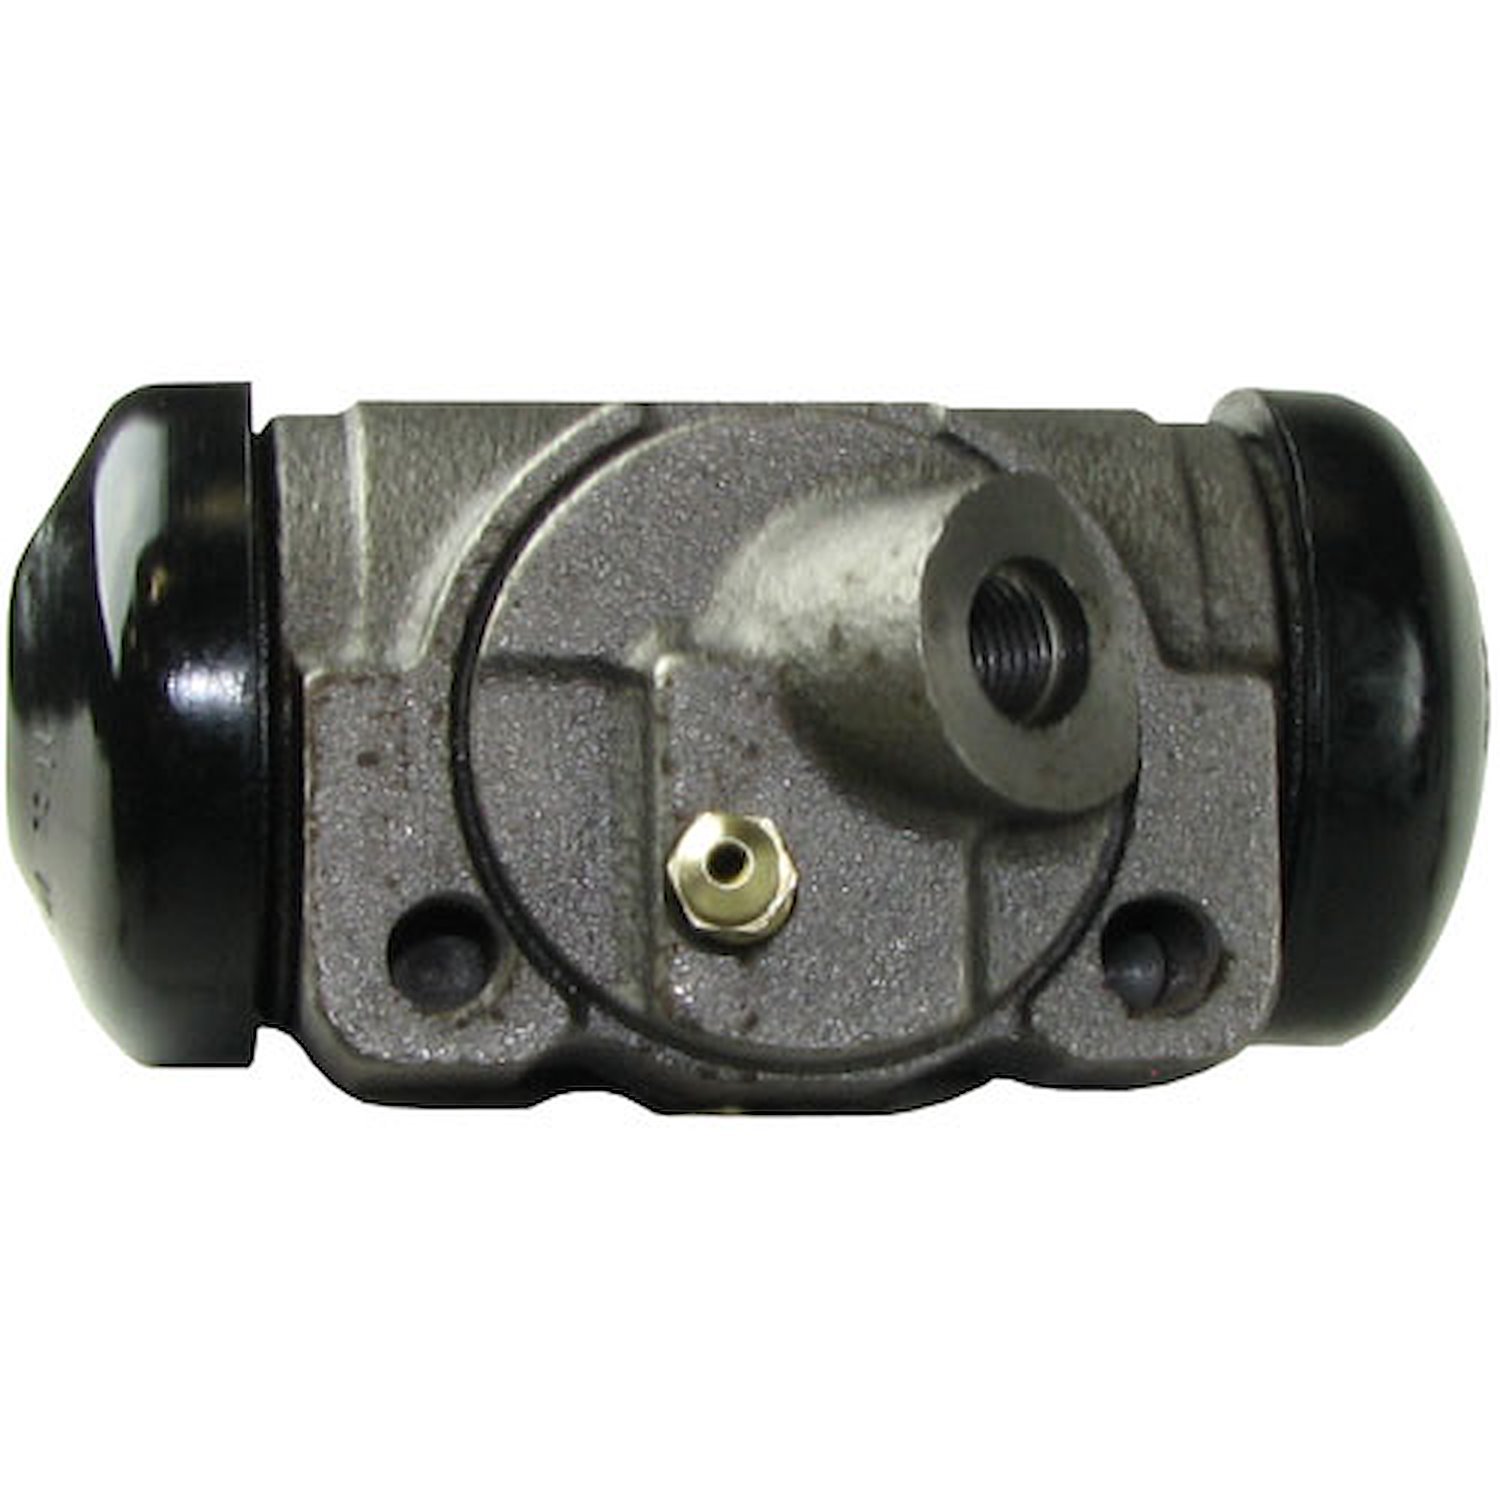 64 -73 Left 1 1/8 Bore 8 Cyl - Front Wheel Cylinder